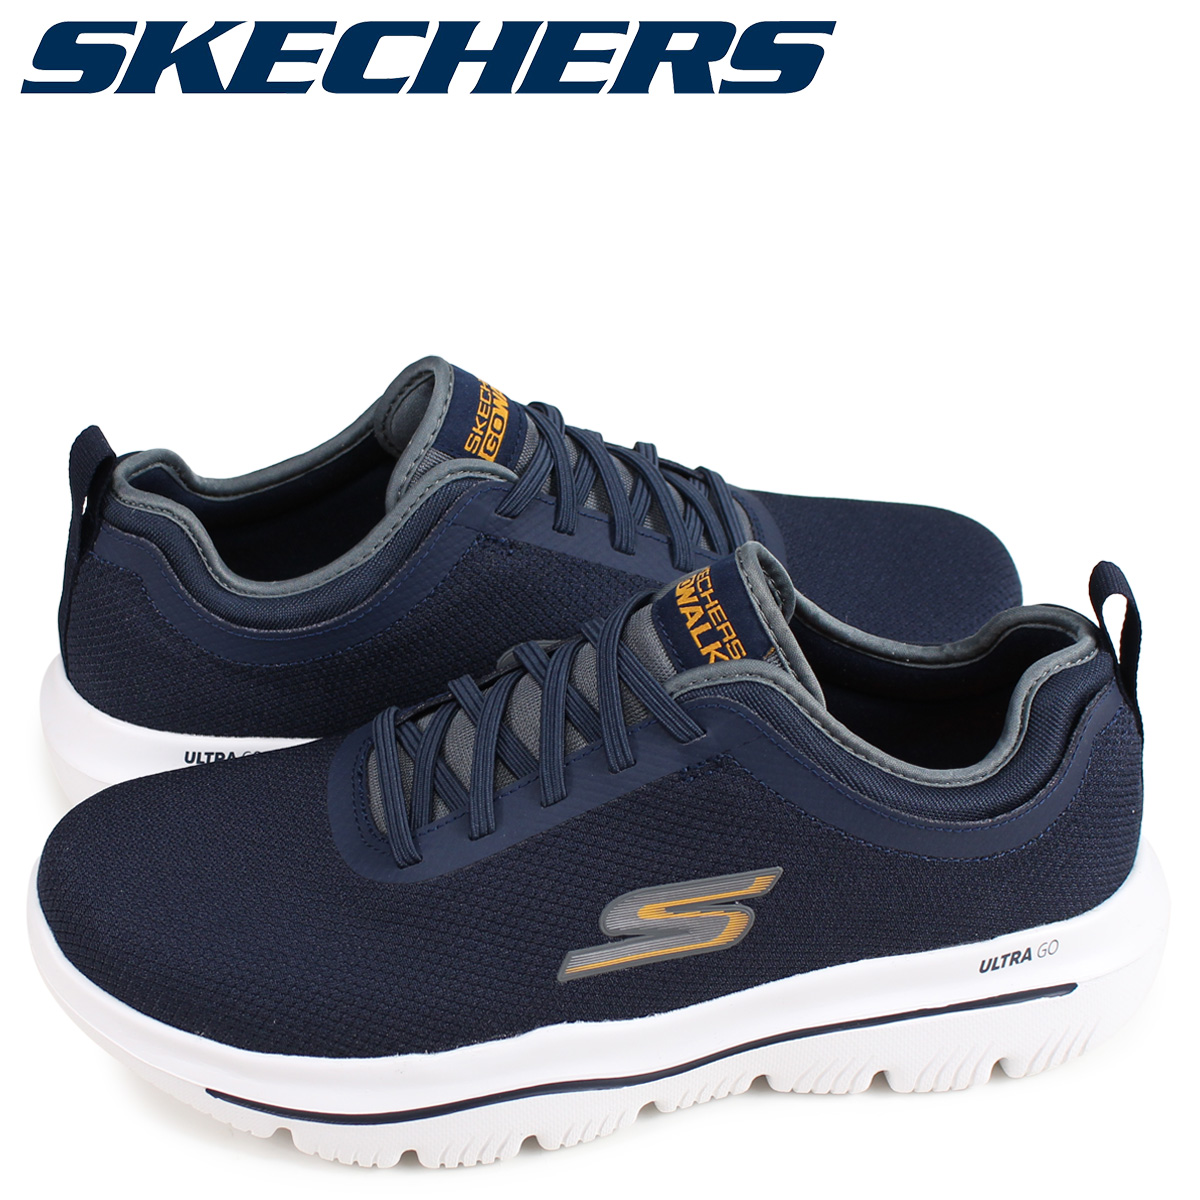 skechers on the go mens yellow